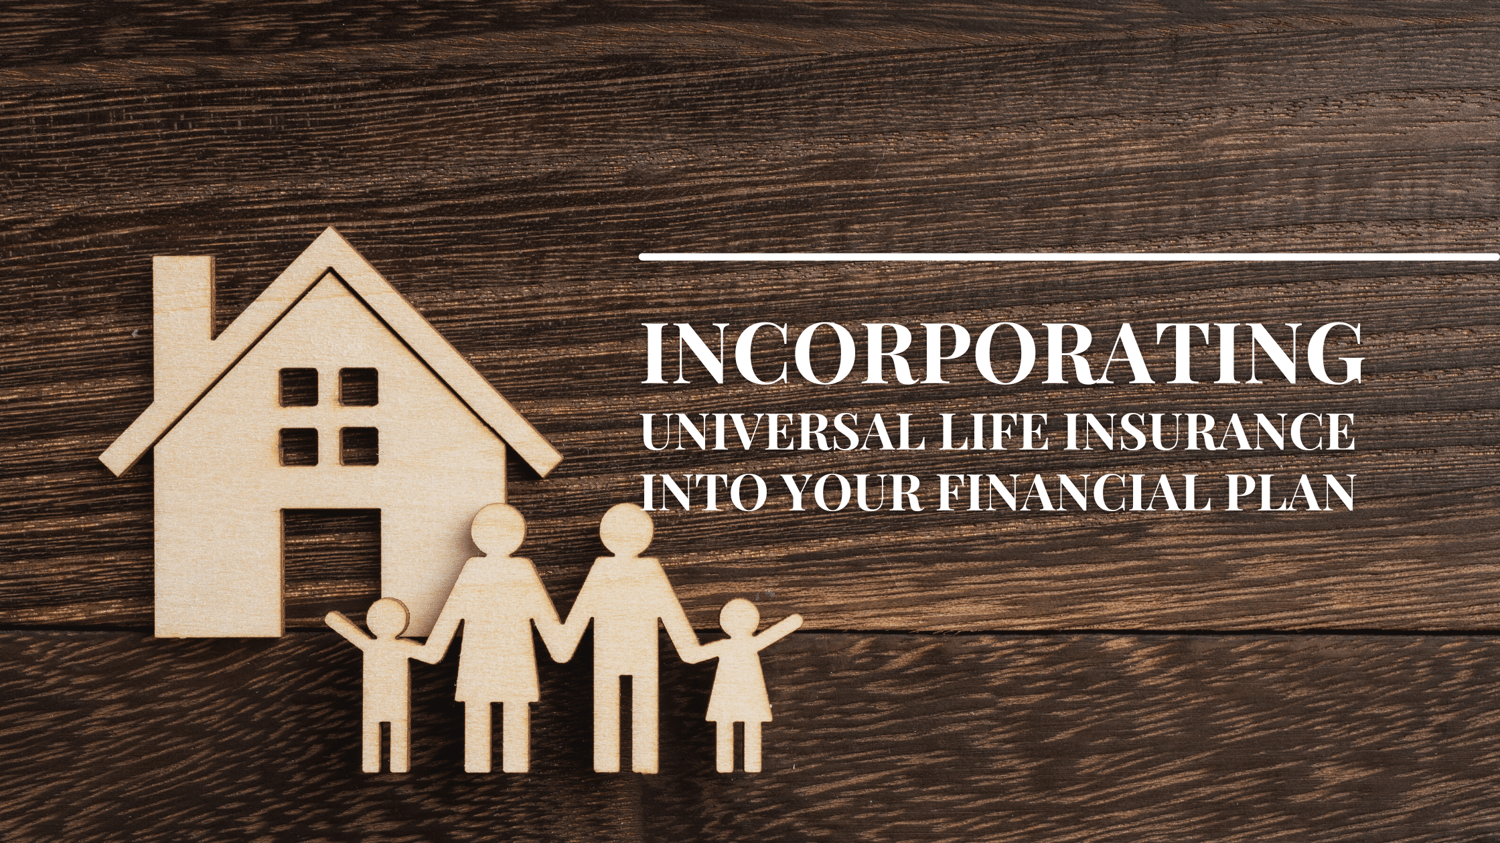 INCORPORATING UNIVERSAL LIFE INSURANCE INTO YOUR FINANCIAL PLAN